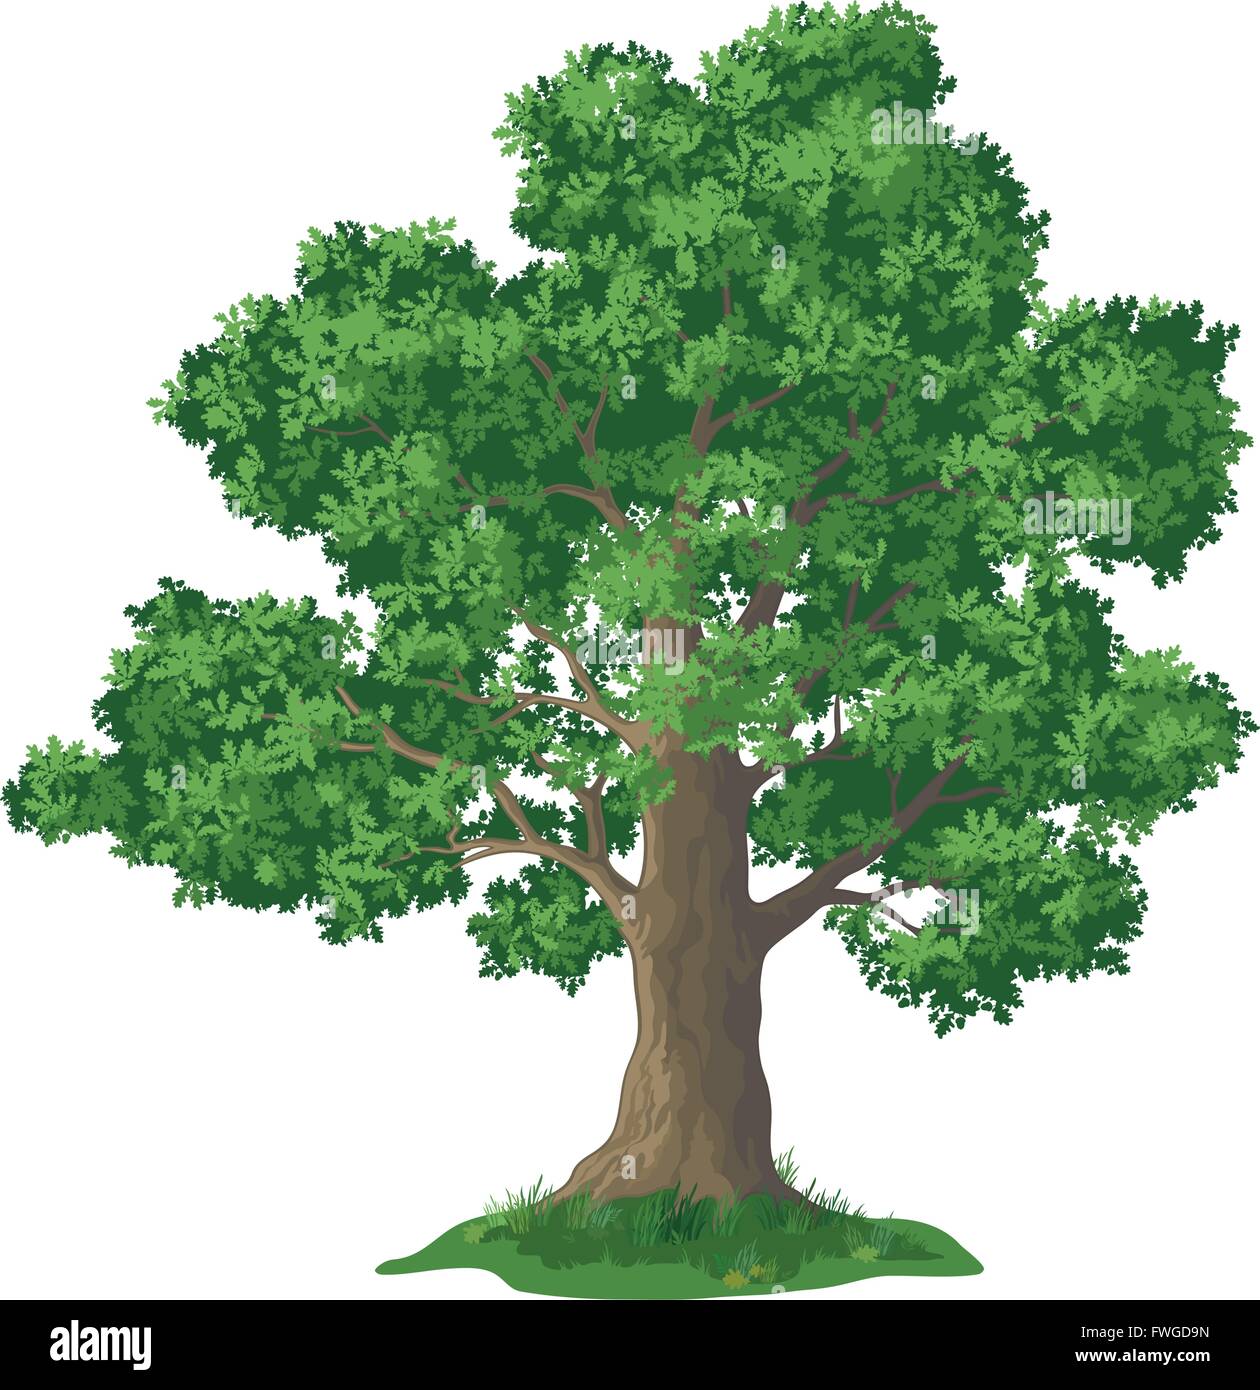 Oak tree and green grass Stock Vector